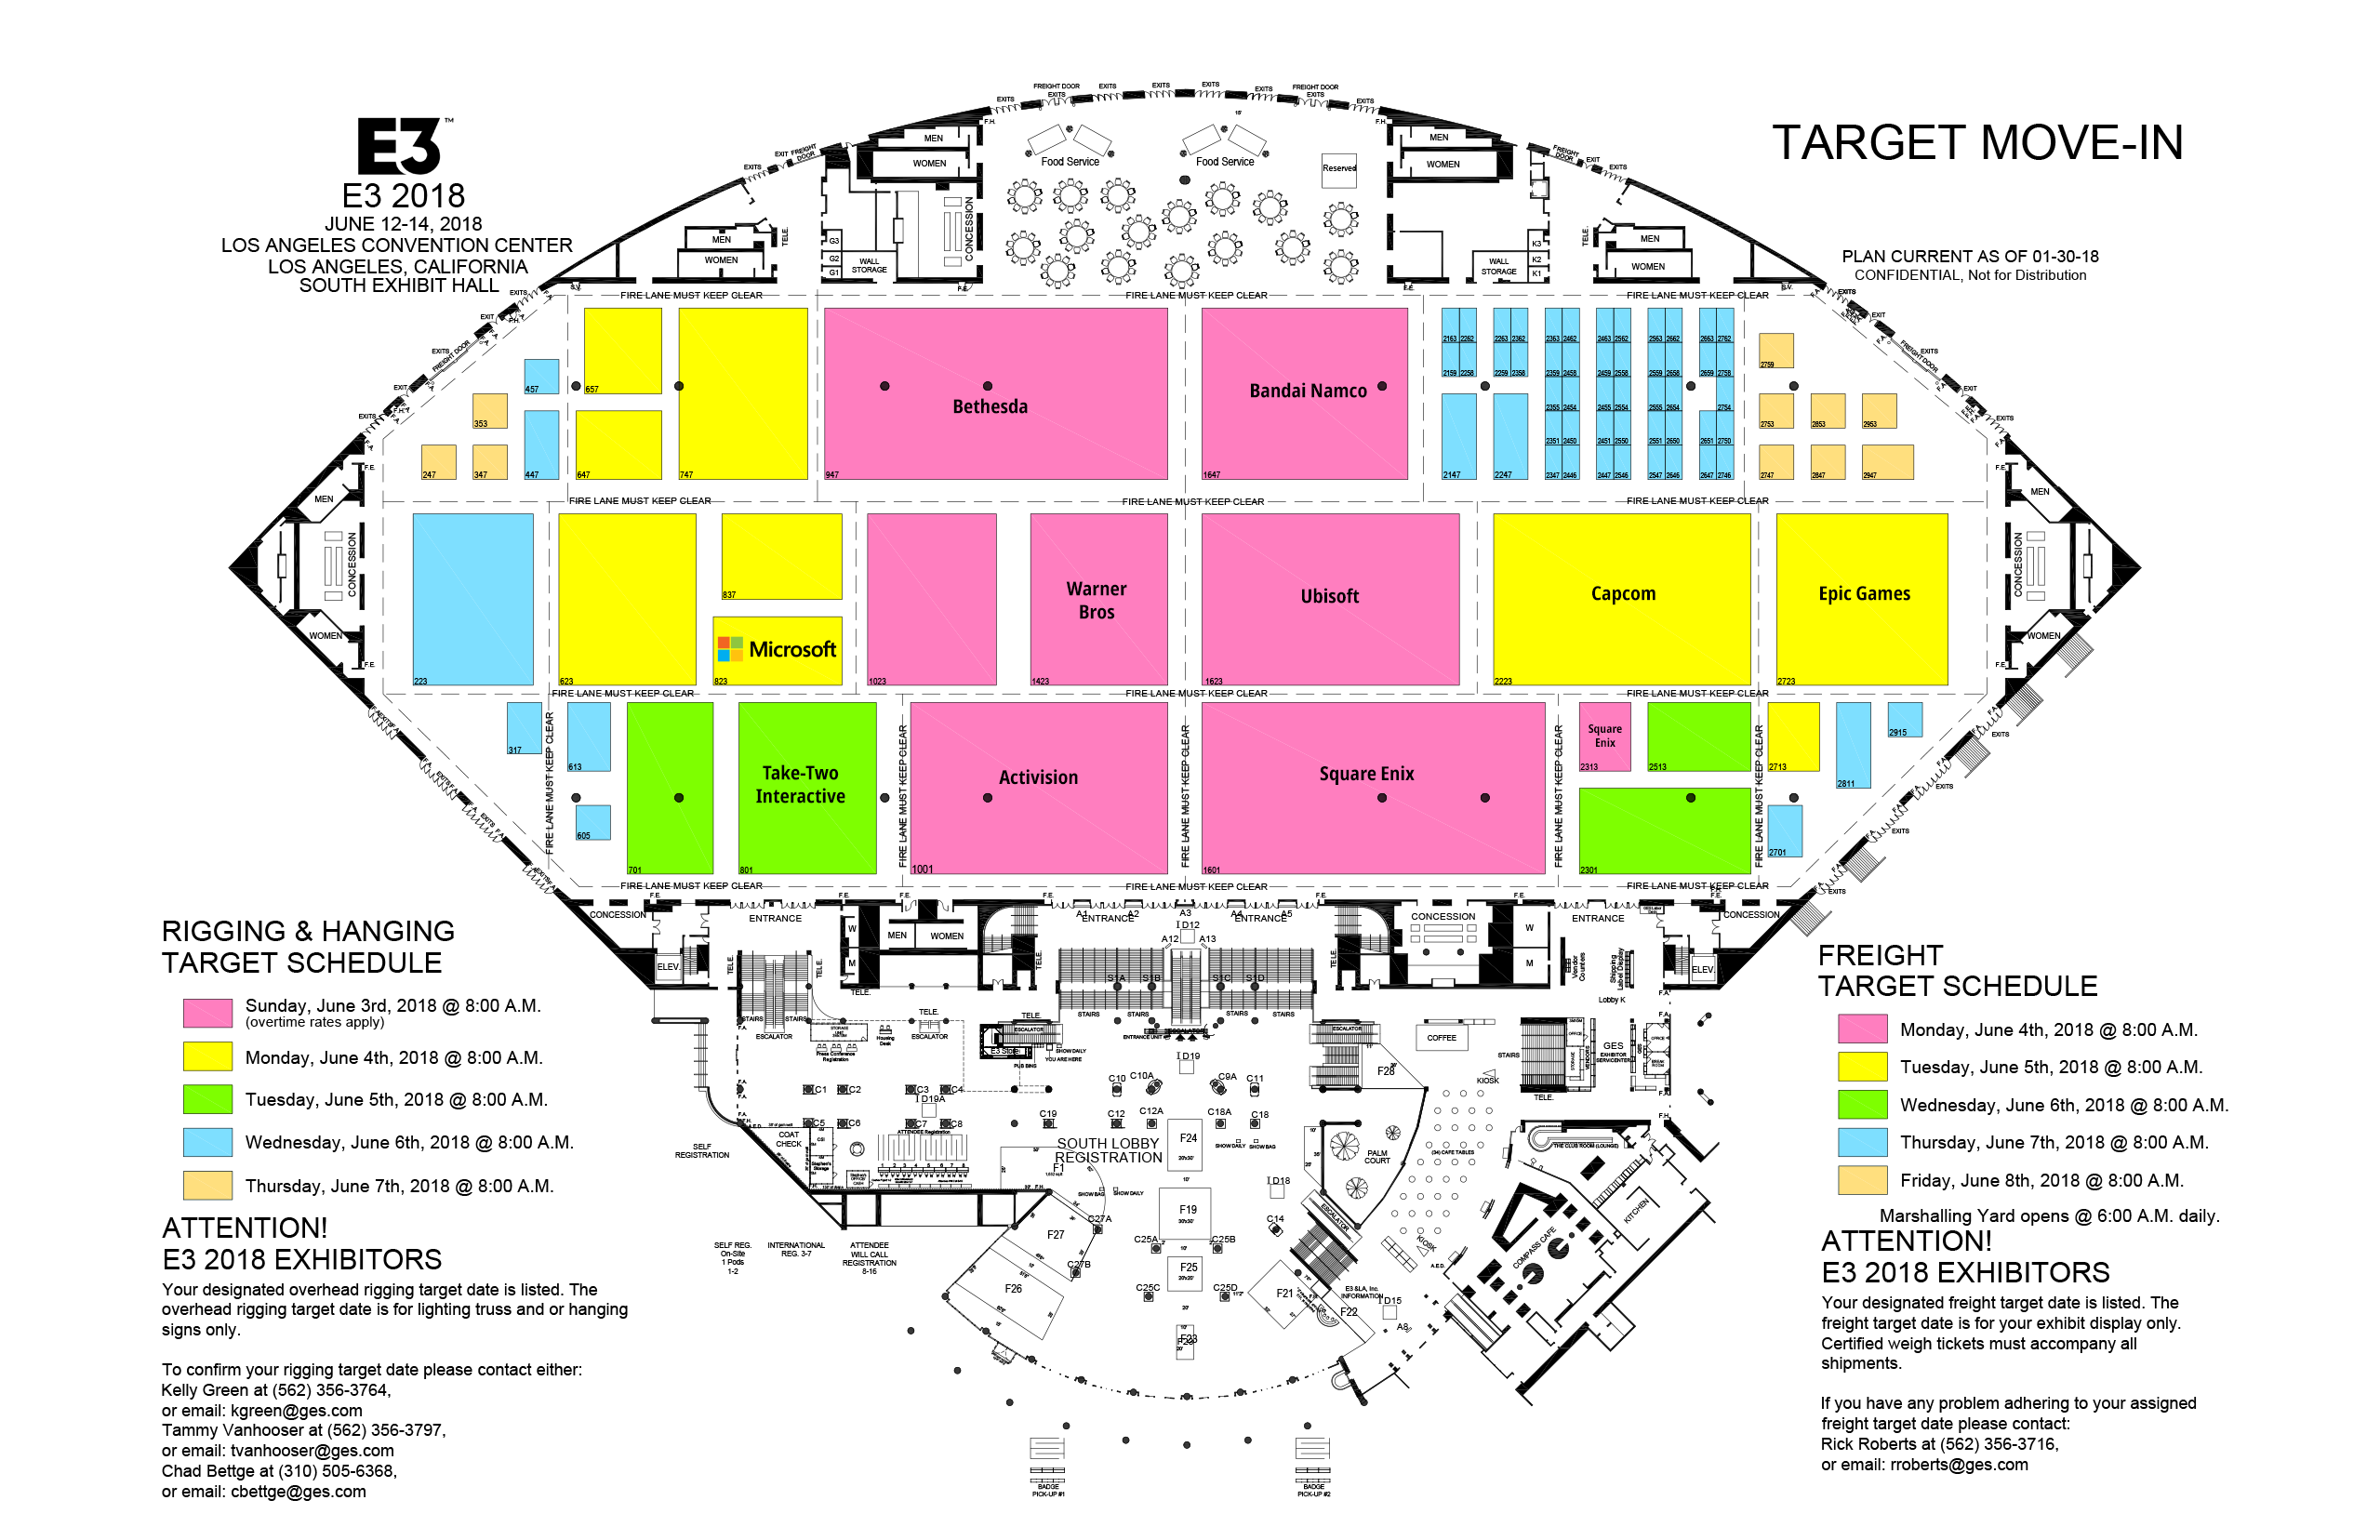 E3 2018 Floor Plans Revealed; Nintendo and Sony Lead the